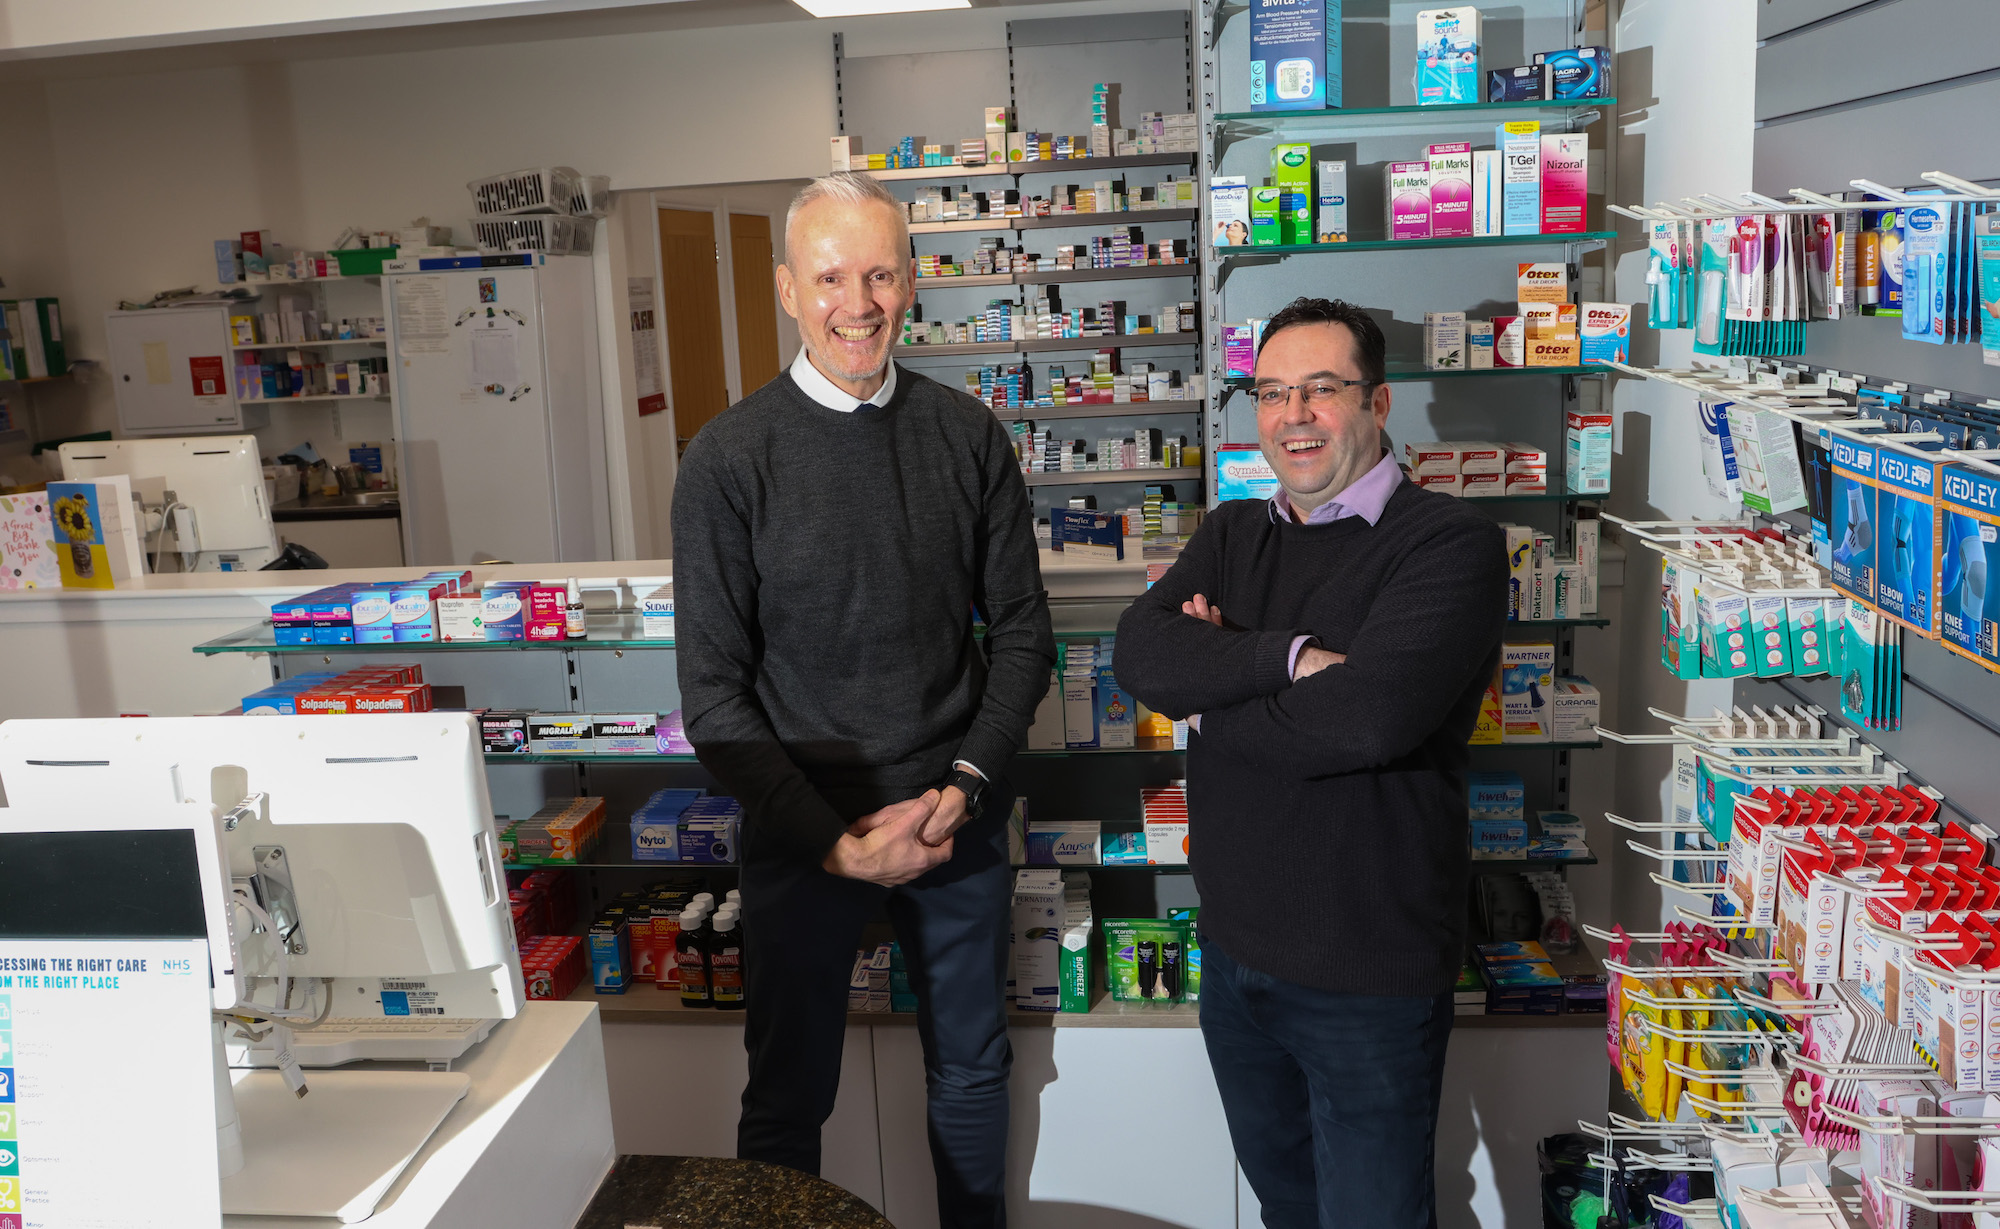 Glasgow pharmacist expands services and restores historic building with £750,000 funding